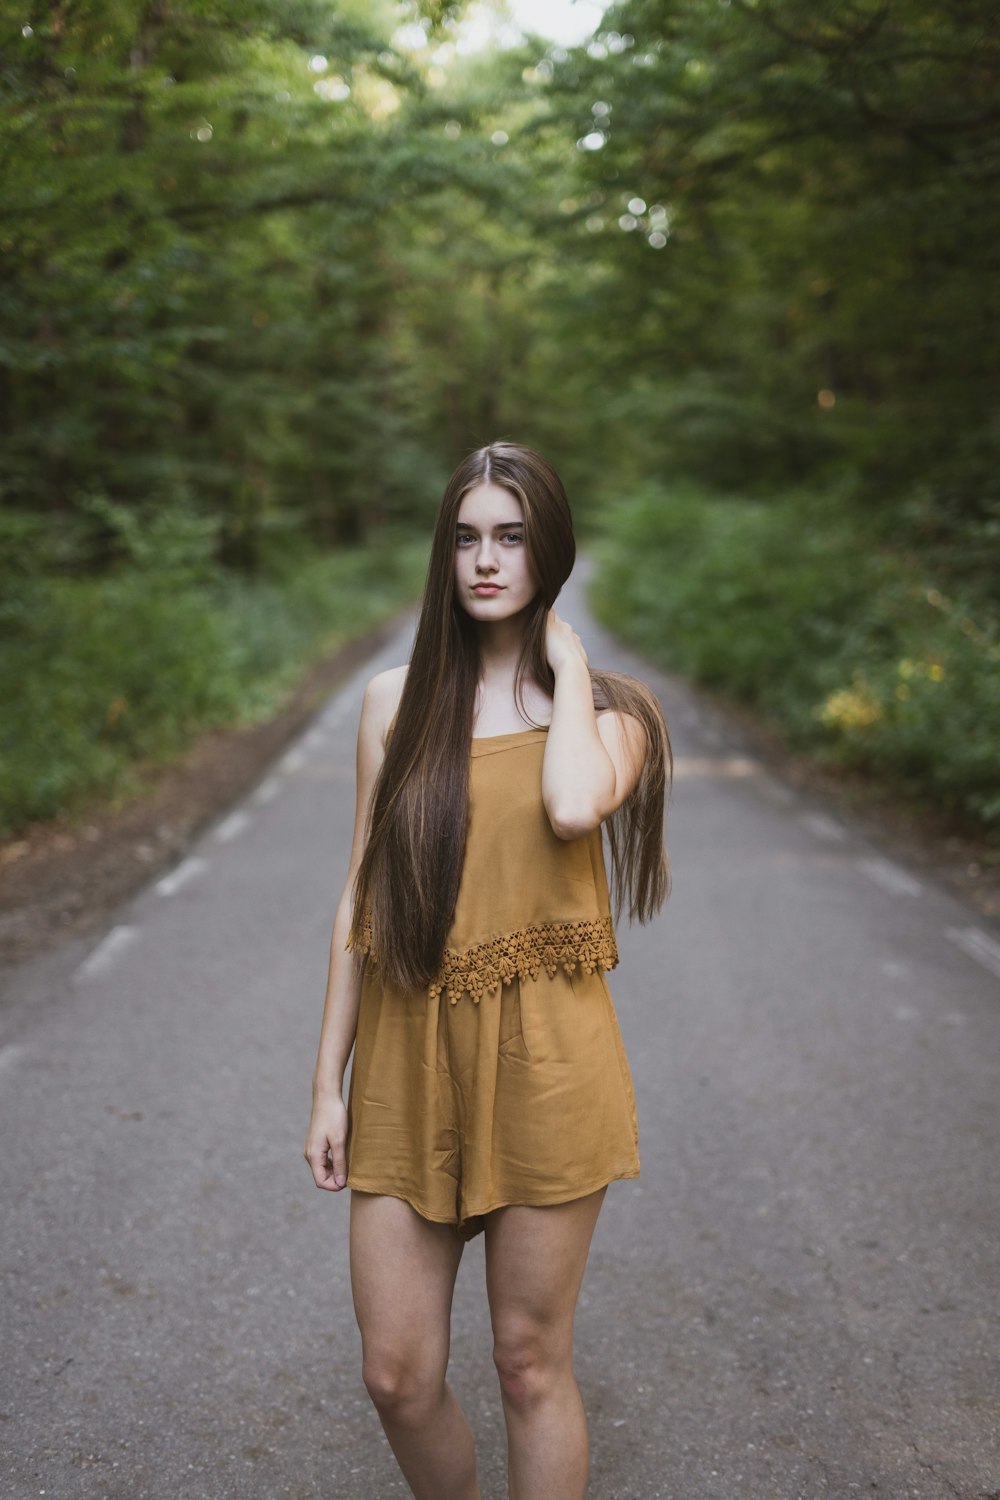 Woman with long hair in a yellow dress in the middle of a country road